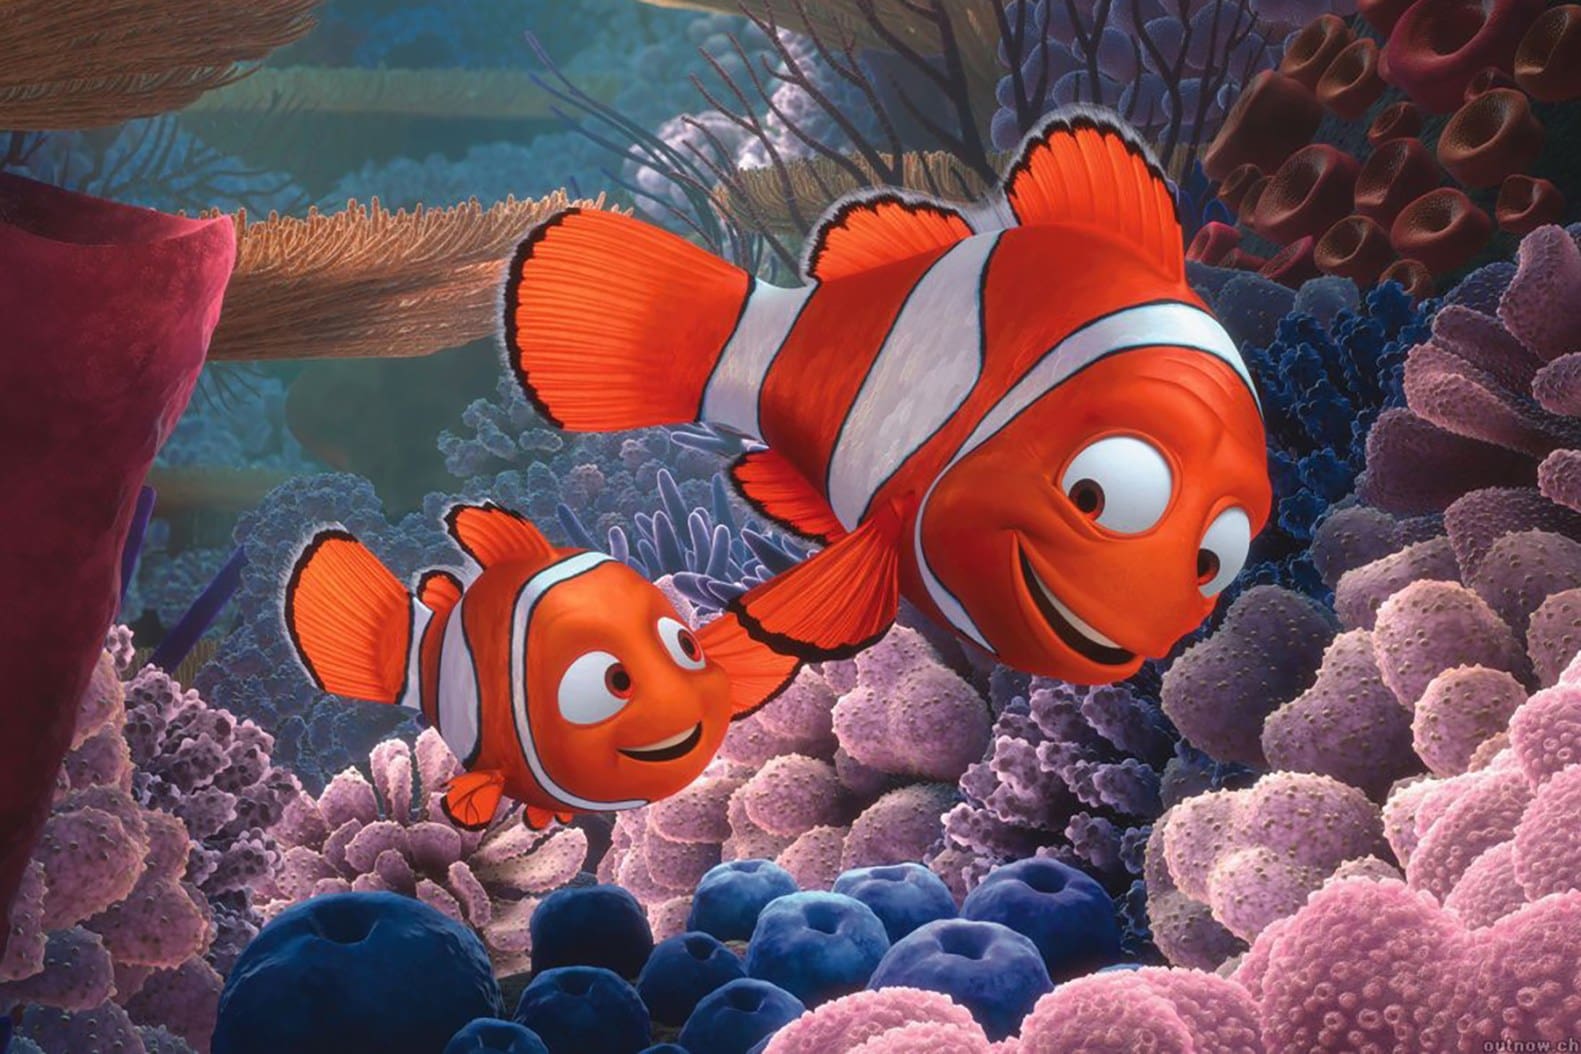 Pixar Considering Reboots for The Incredibles and Finding Nemo